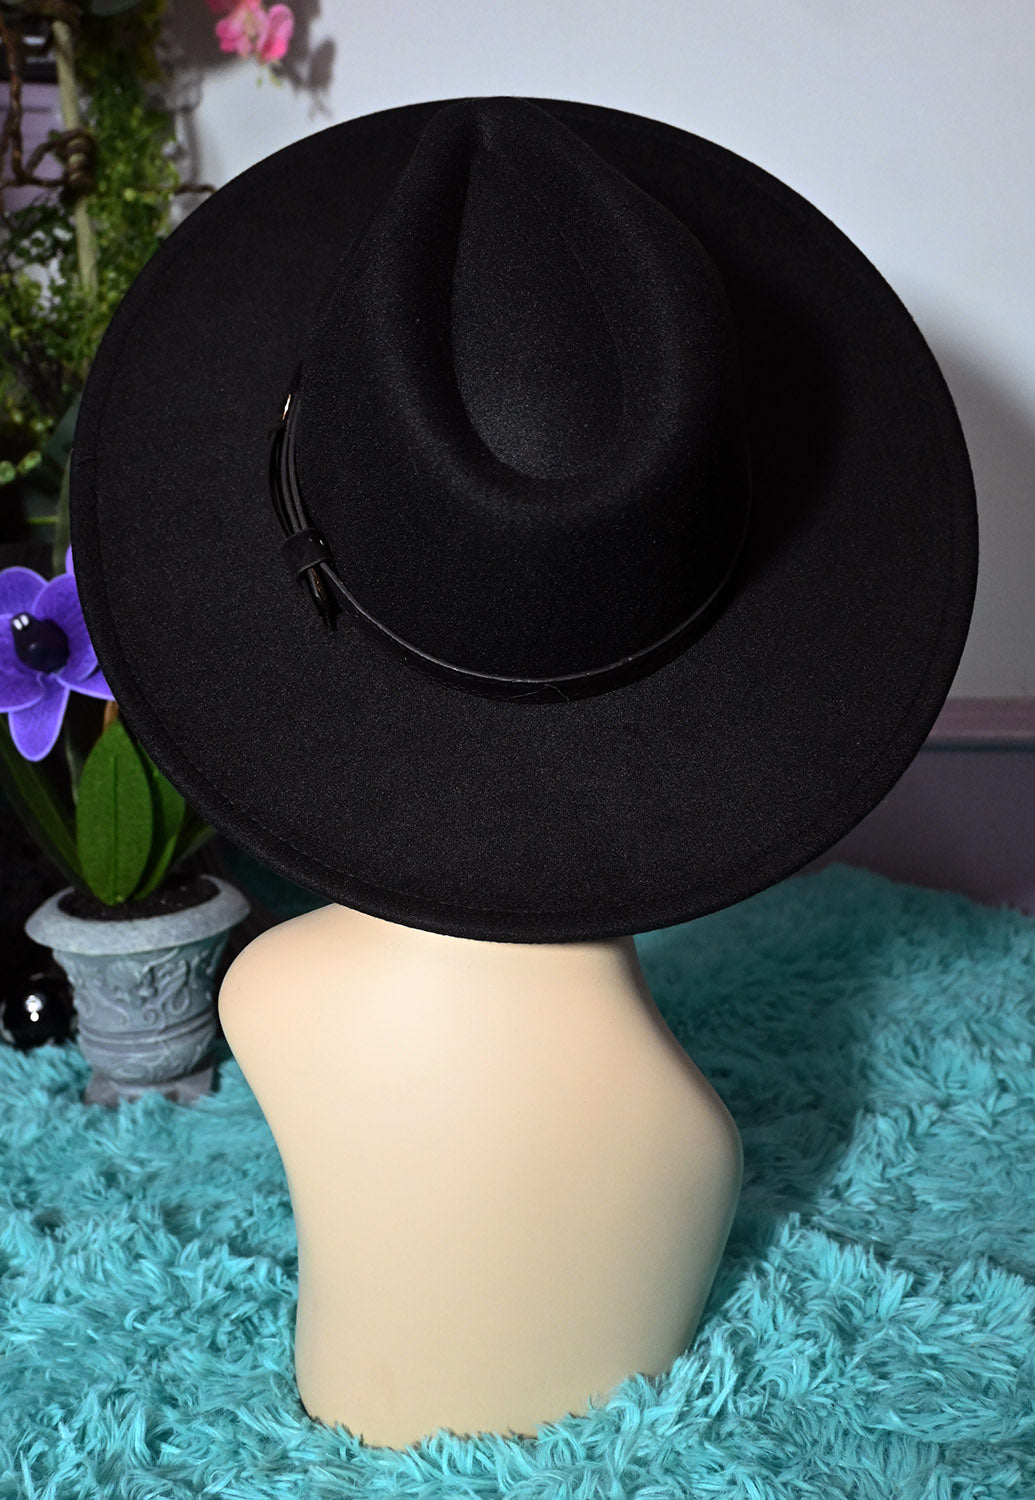 Bleeding Hearts Floral XL Vegan Felt Wide Brim Hat from Witchwood Bags